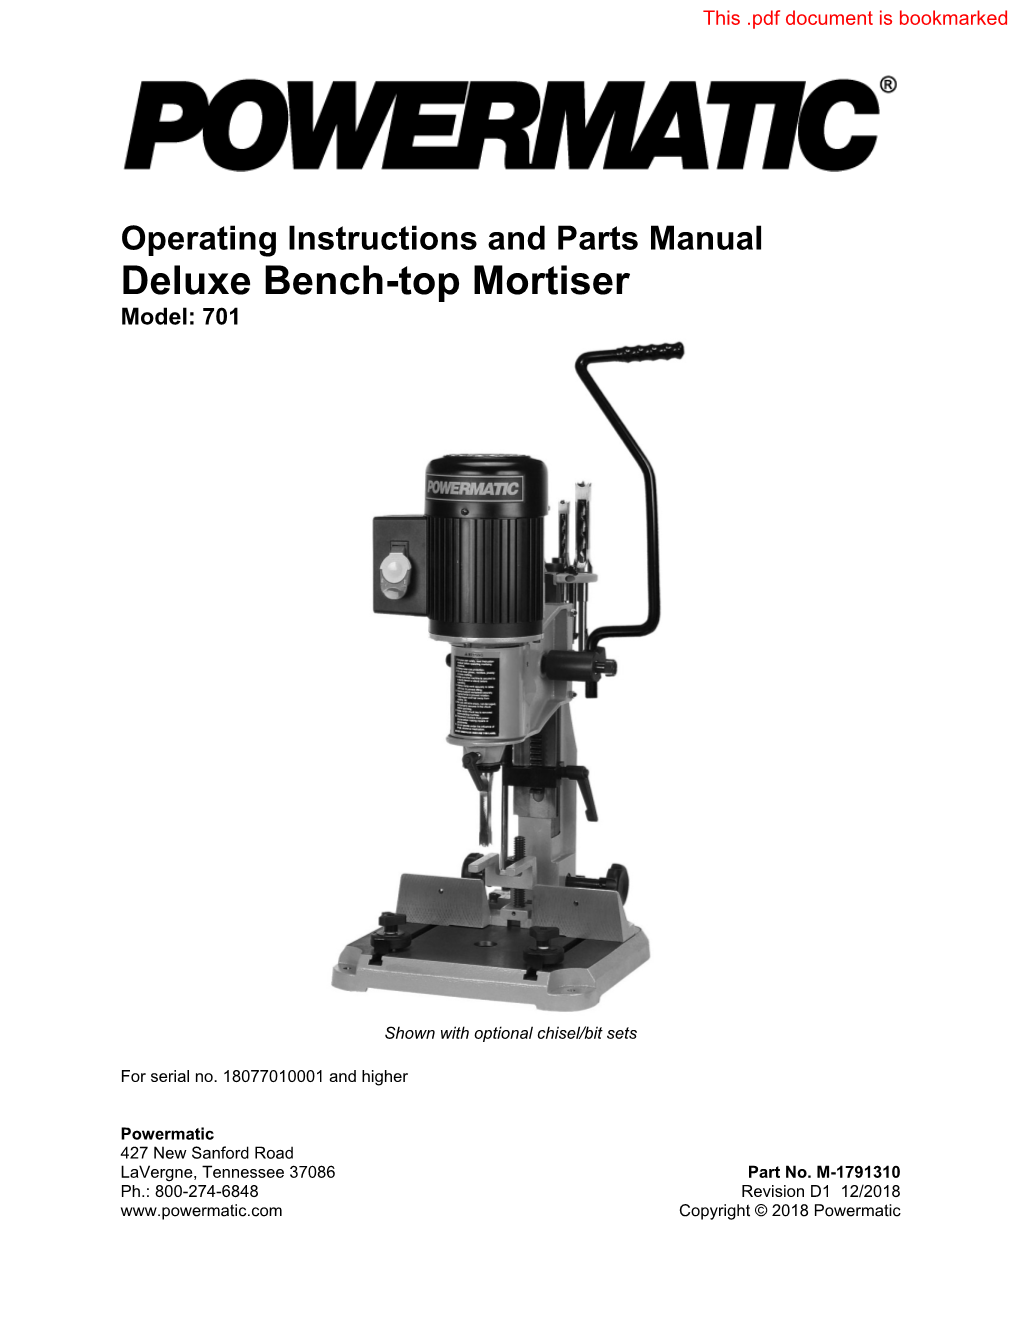 Operating Instructions and Parts Manual Deluxe Bench-Top Mortiser Model: 701